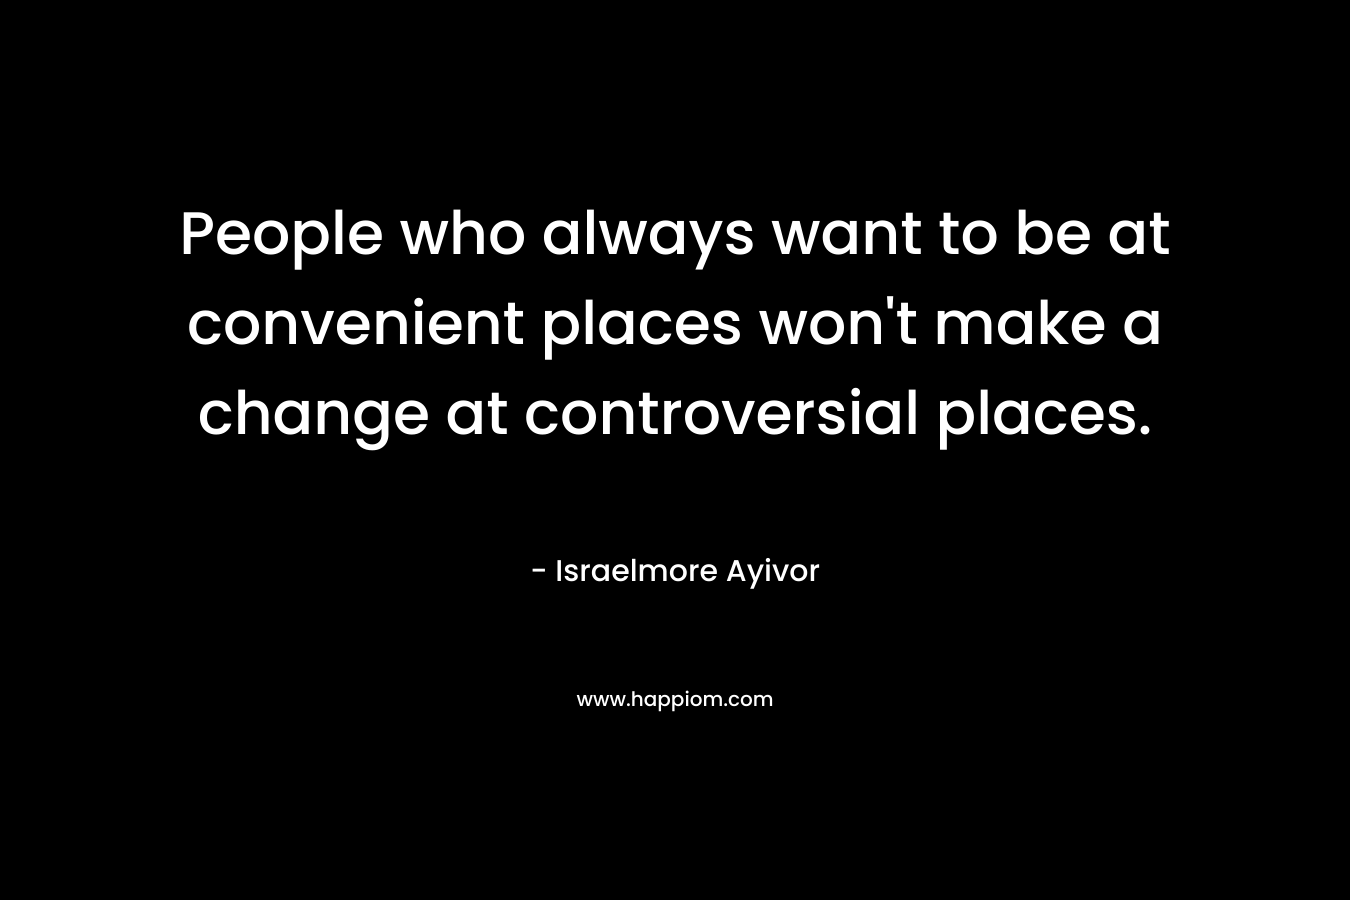 People who always want to be at convenient places won't make a change at controversial places.